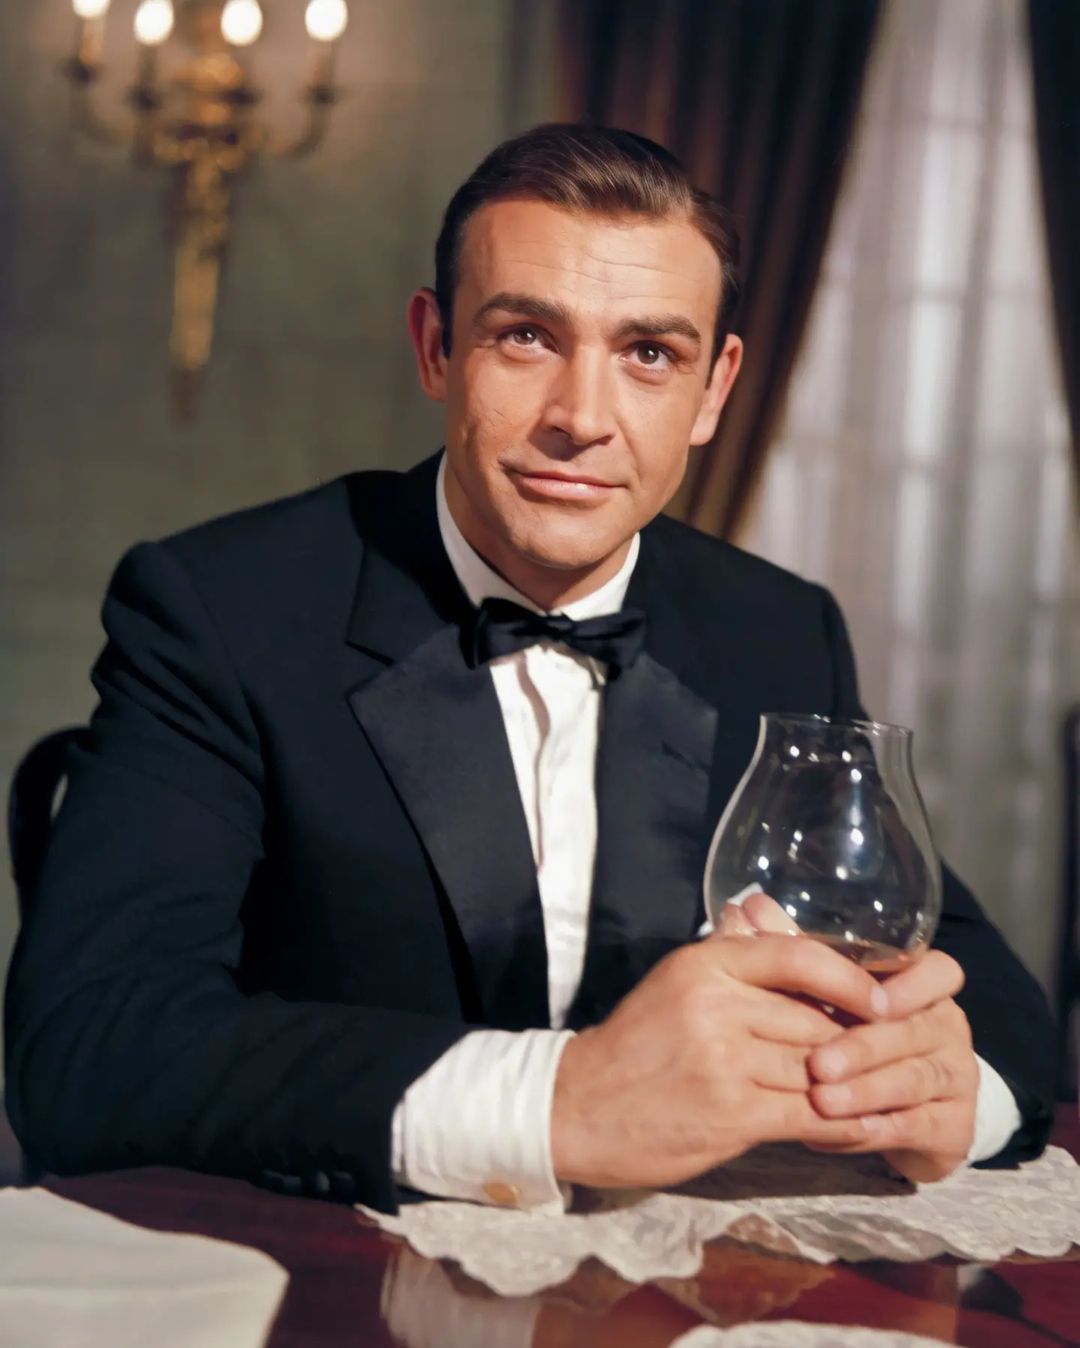 Sean Connery is featured as James Bond